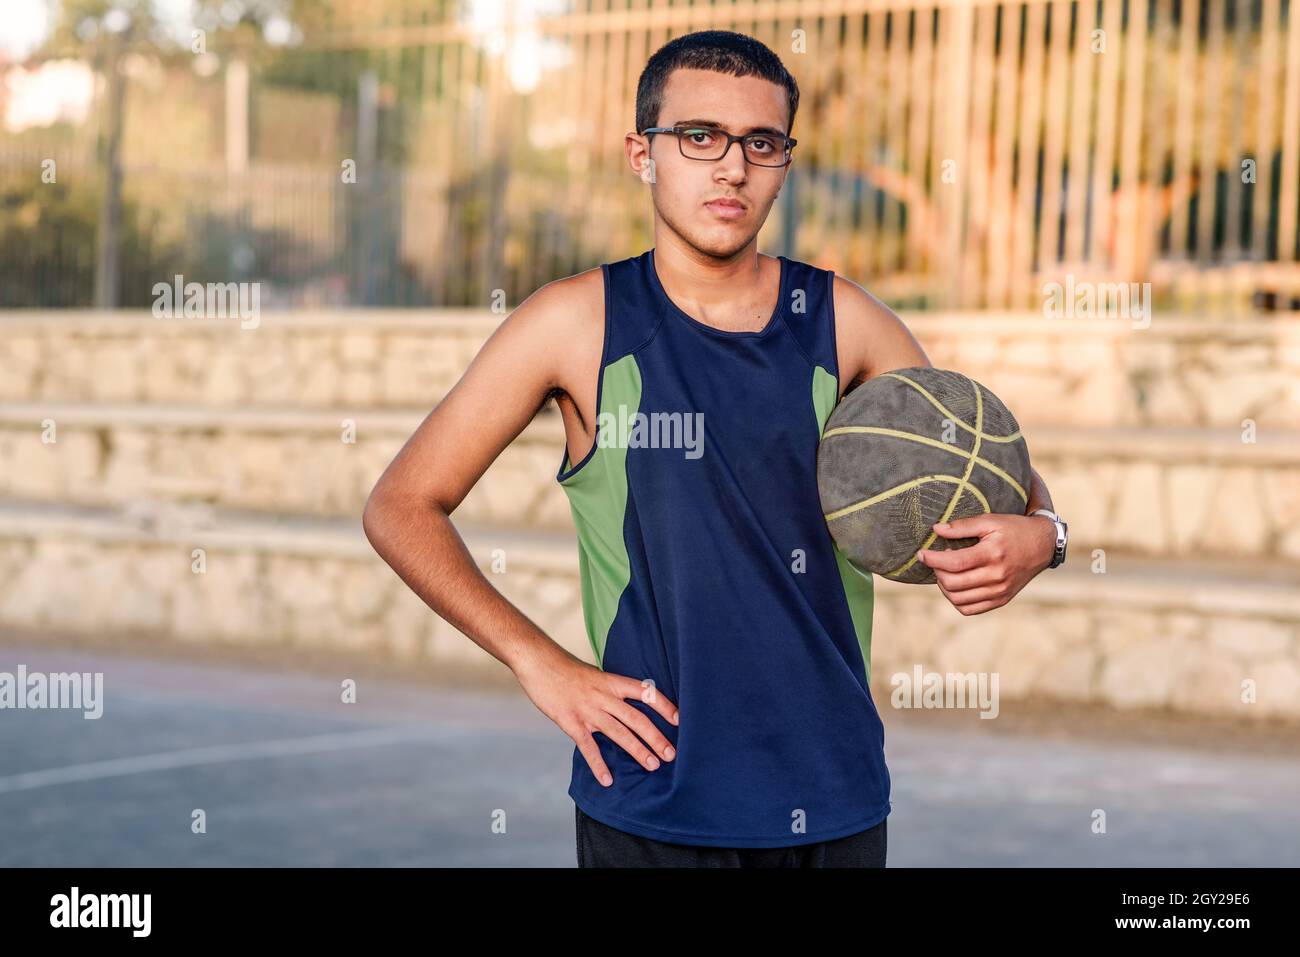 Young child holding a basketball. Serious teenager with basket ball on basketball court at sunset. Stock Photo